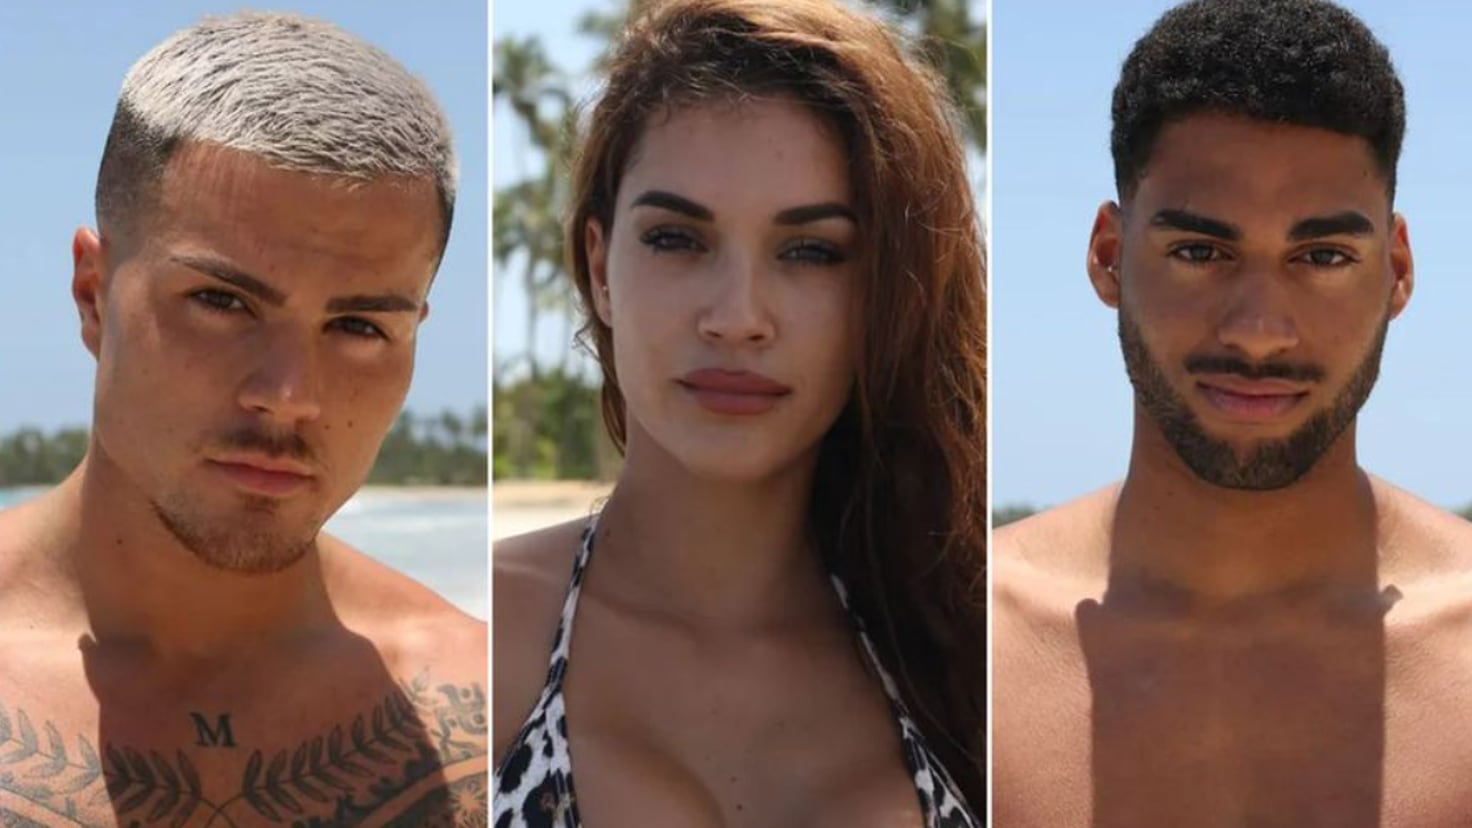 Temptation Island 7 official singles list: who are the tempters of LIDLT 7?
